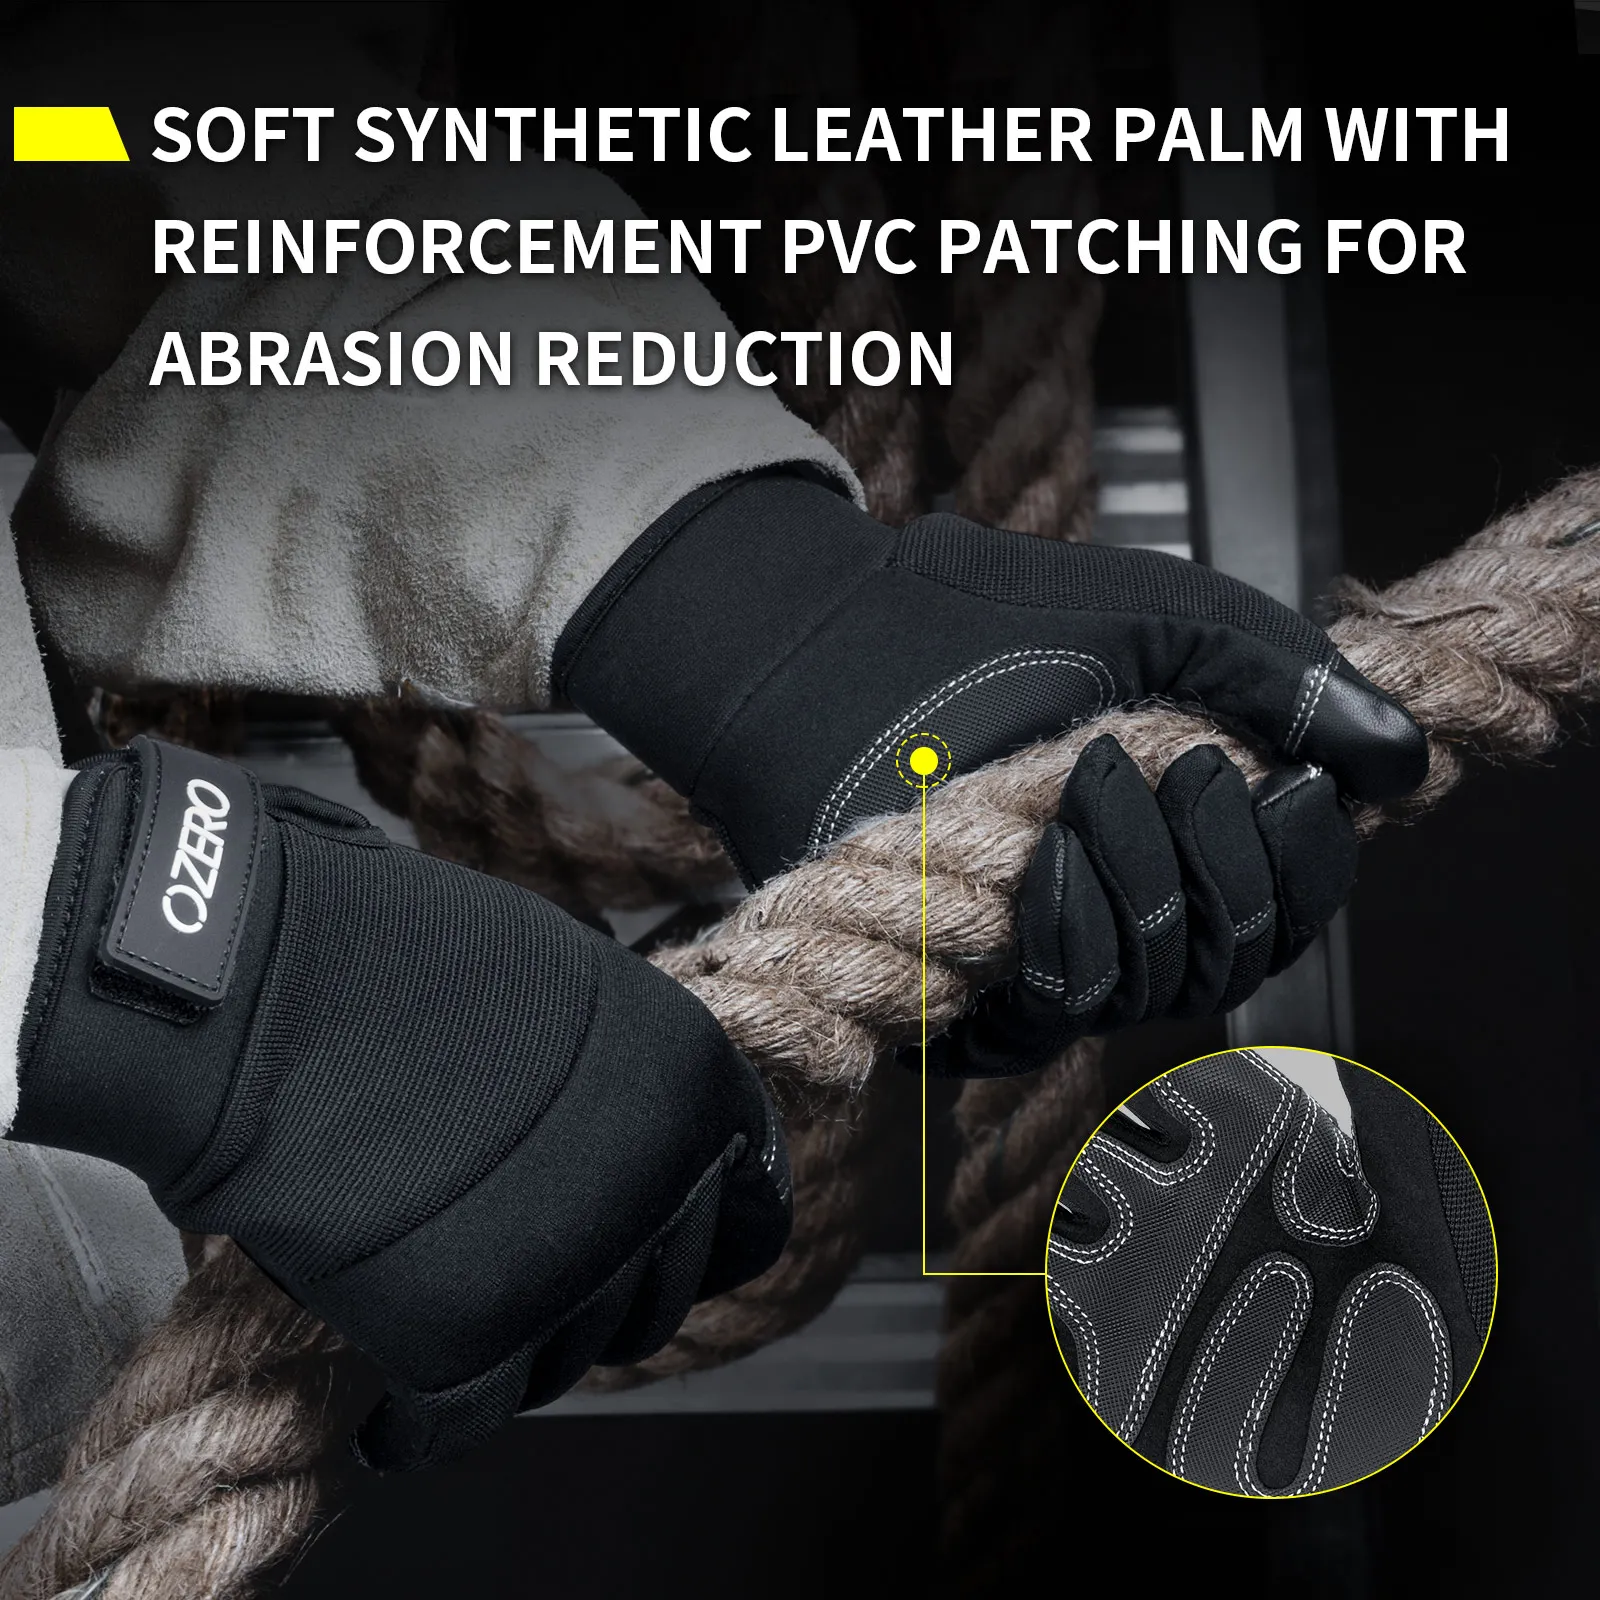 https://ae01.alicdn.com/kf/H9002b713805542488d83a9a642ce9a86w/OZERO-Garden-Work-Gloves-Touchscreen-Unisex-Working-Welding-Safety-Protective-Synthetic-Leather-Gloves-For-Women-And.jpg